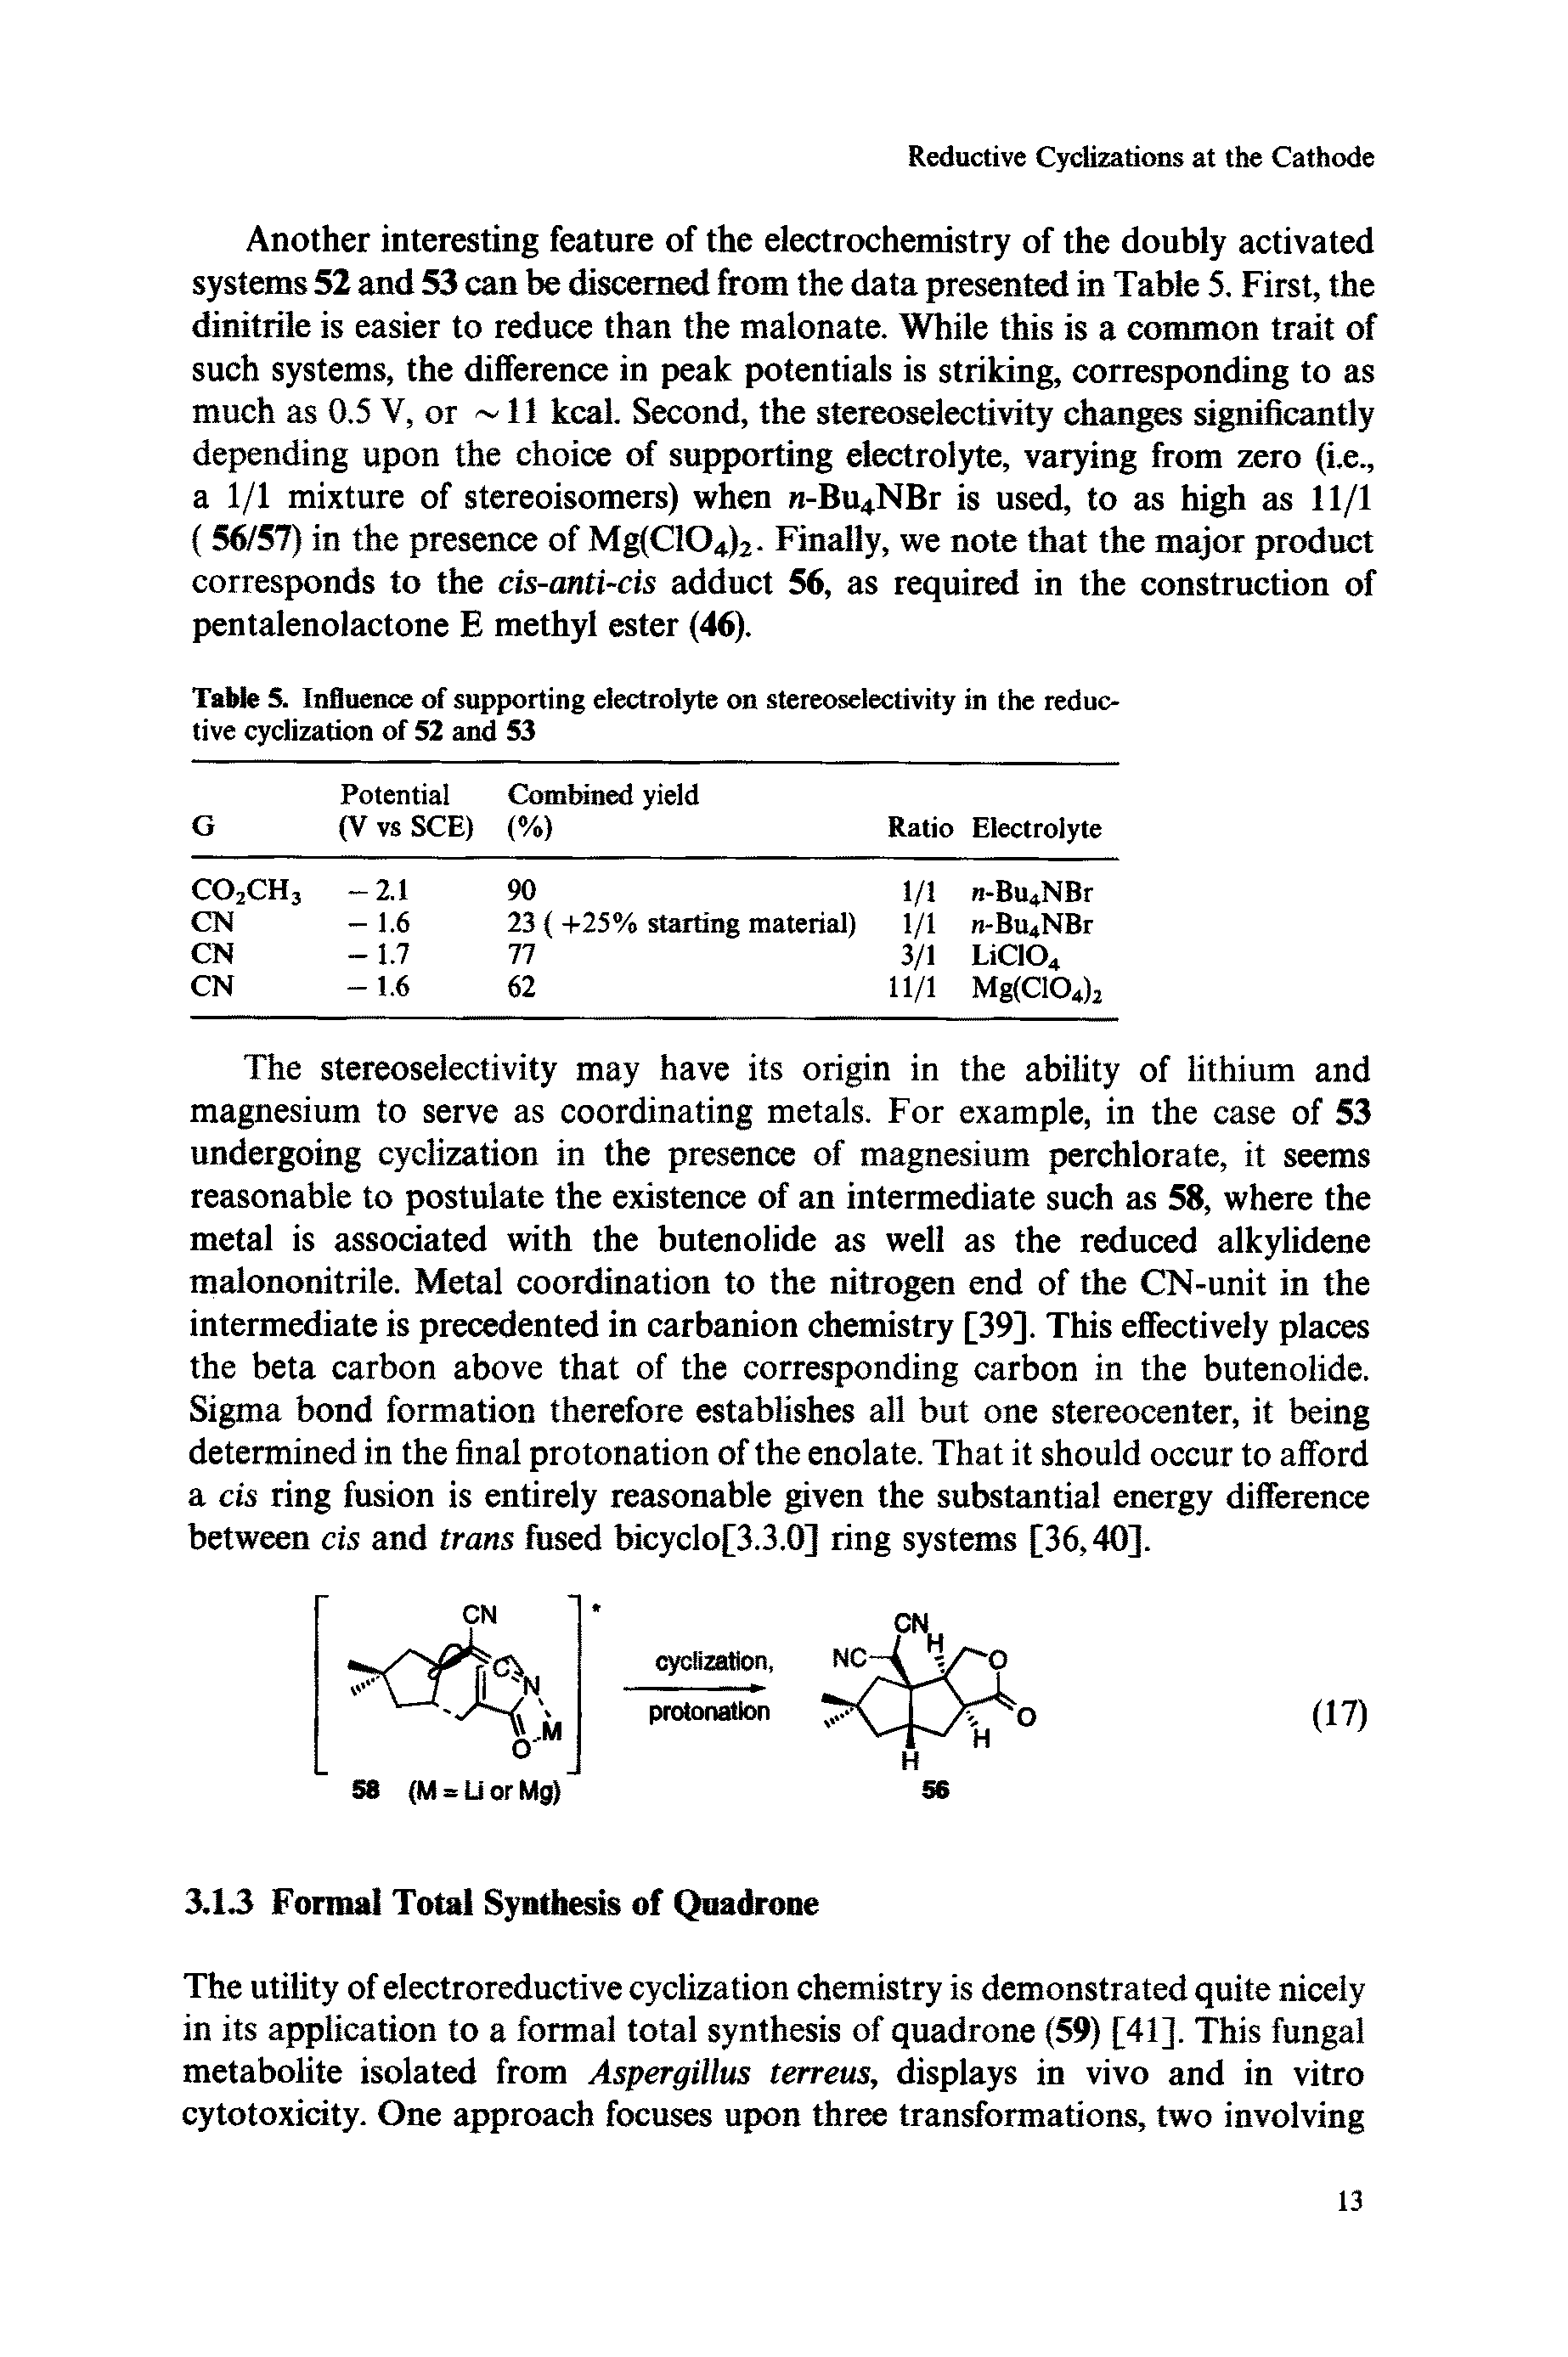 Table 5. Influence of supporting electrolyte on stereoselectivity in the reductive cyclization of 52 and 53...